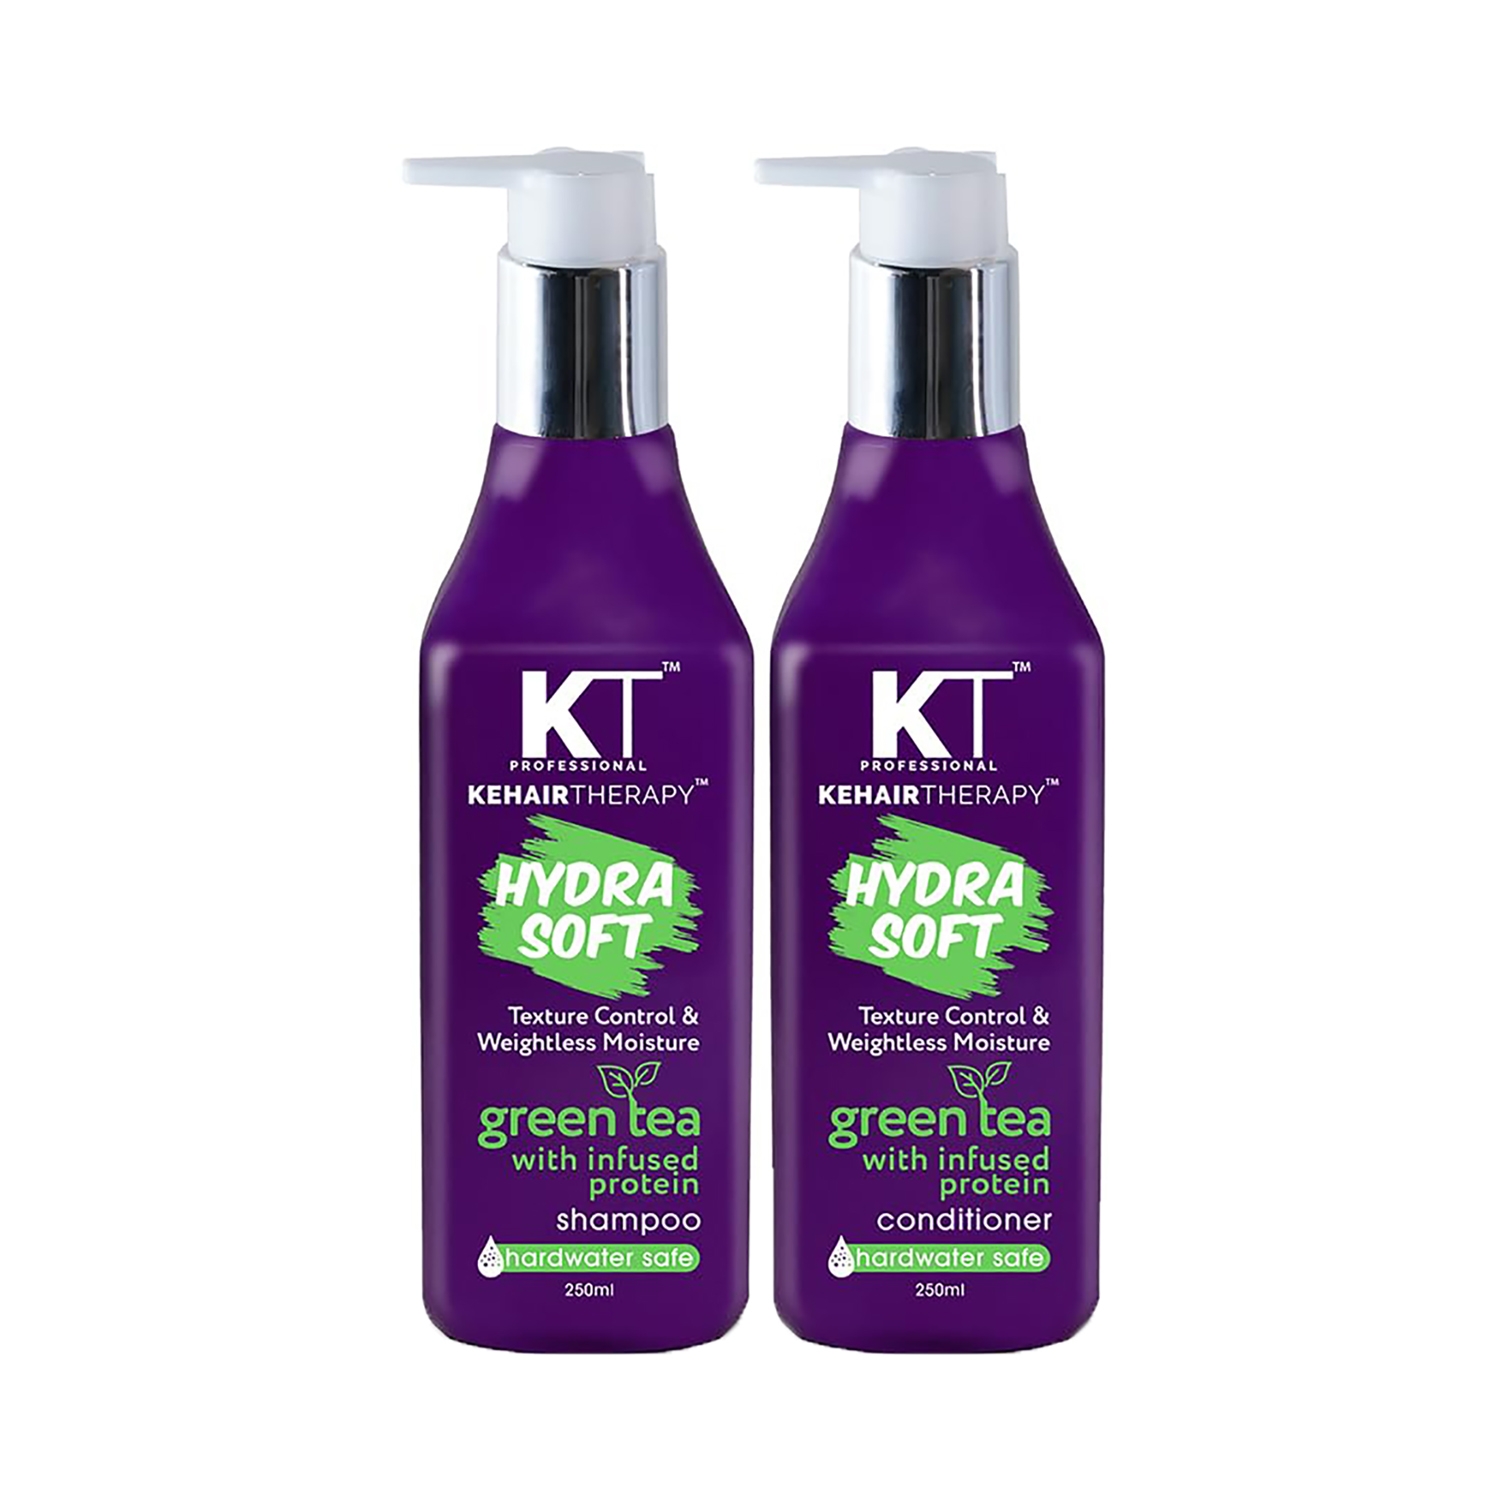 KT Professional | KT Professional Kehairtherapy Hydra Soft Shampoo & Conditioner Combo (2Pcs)